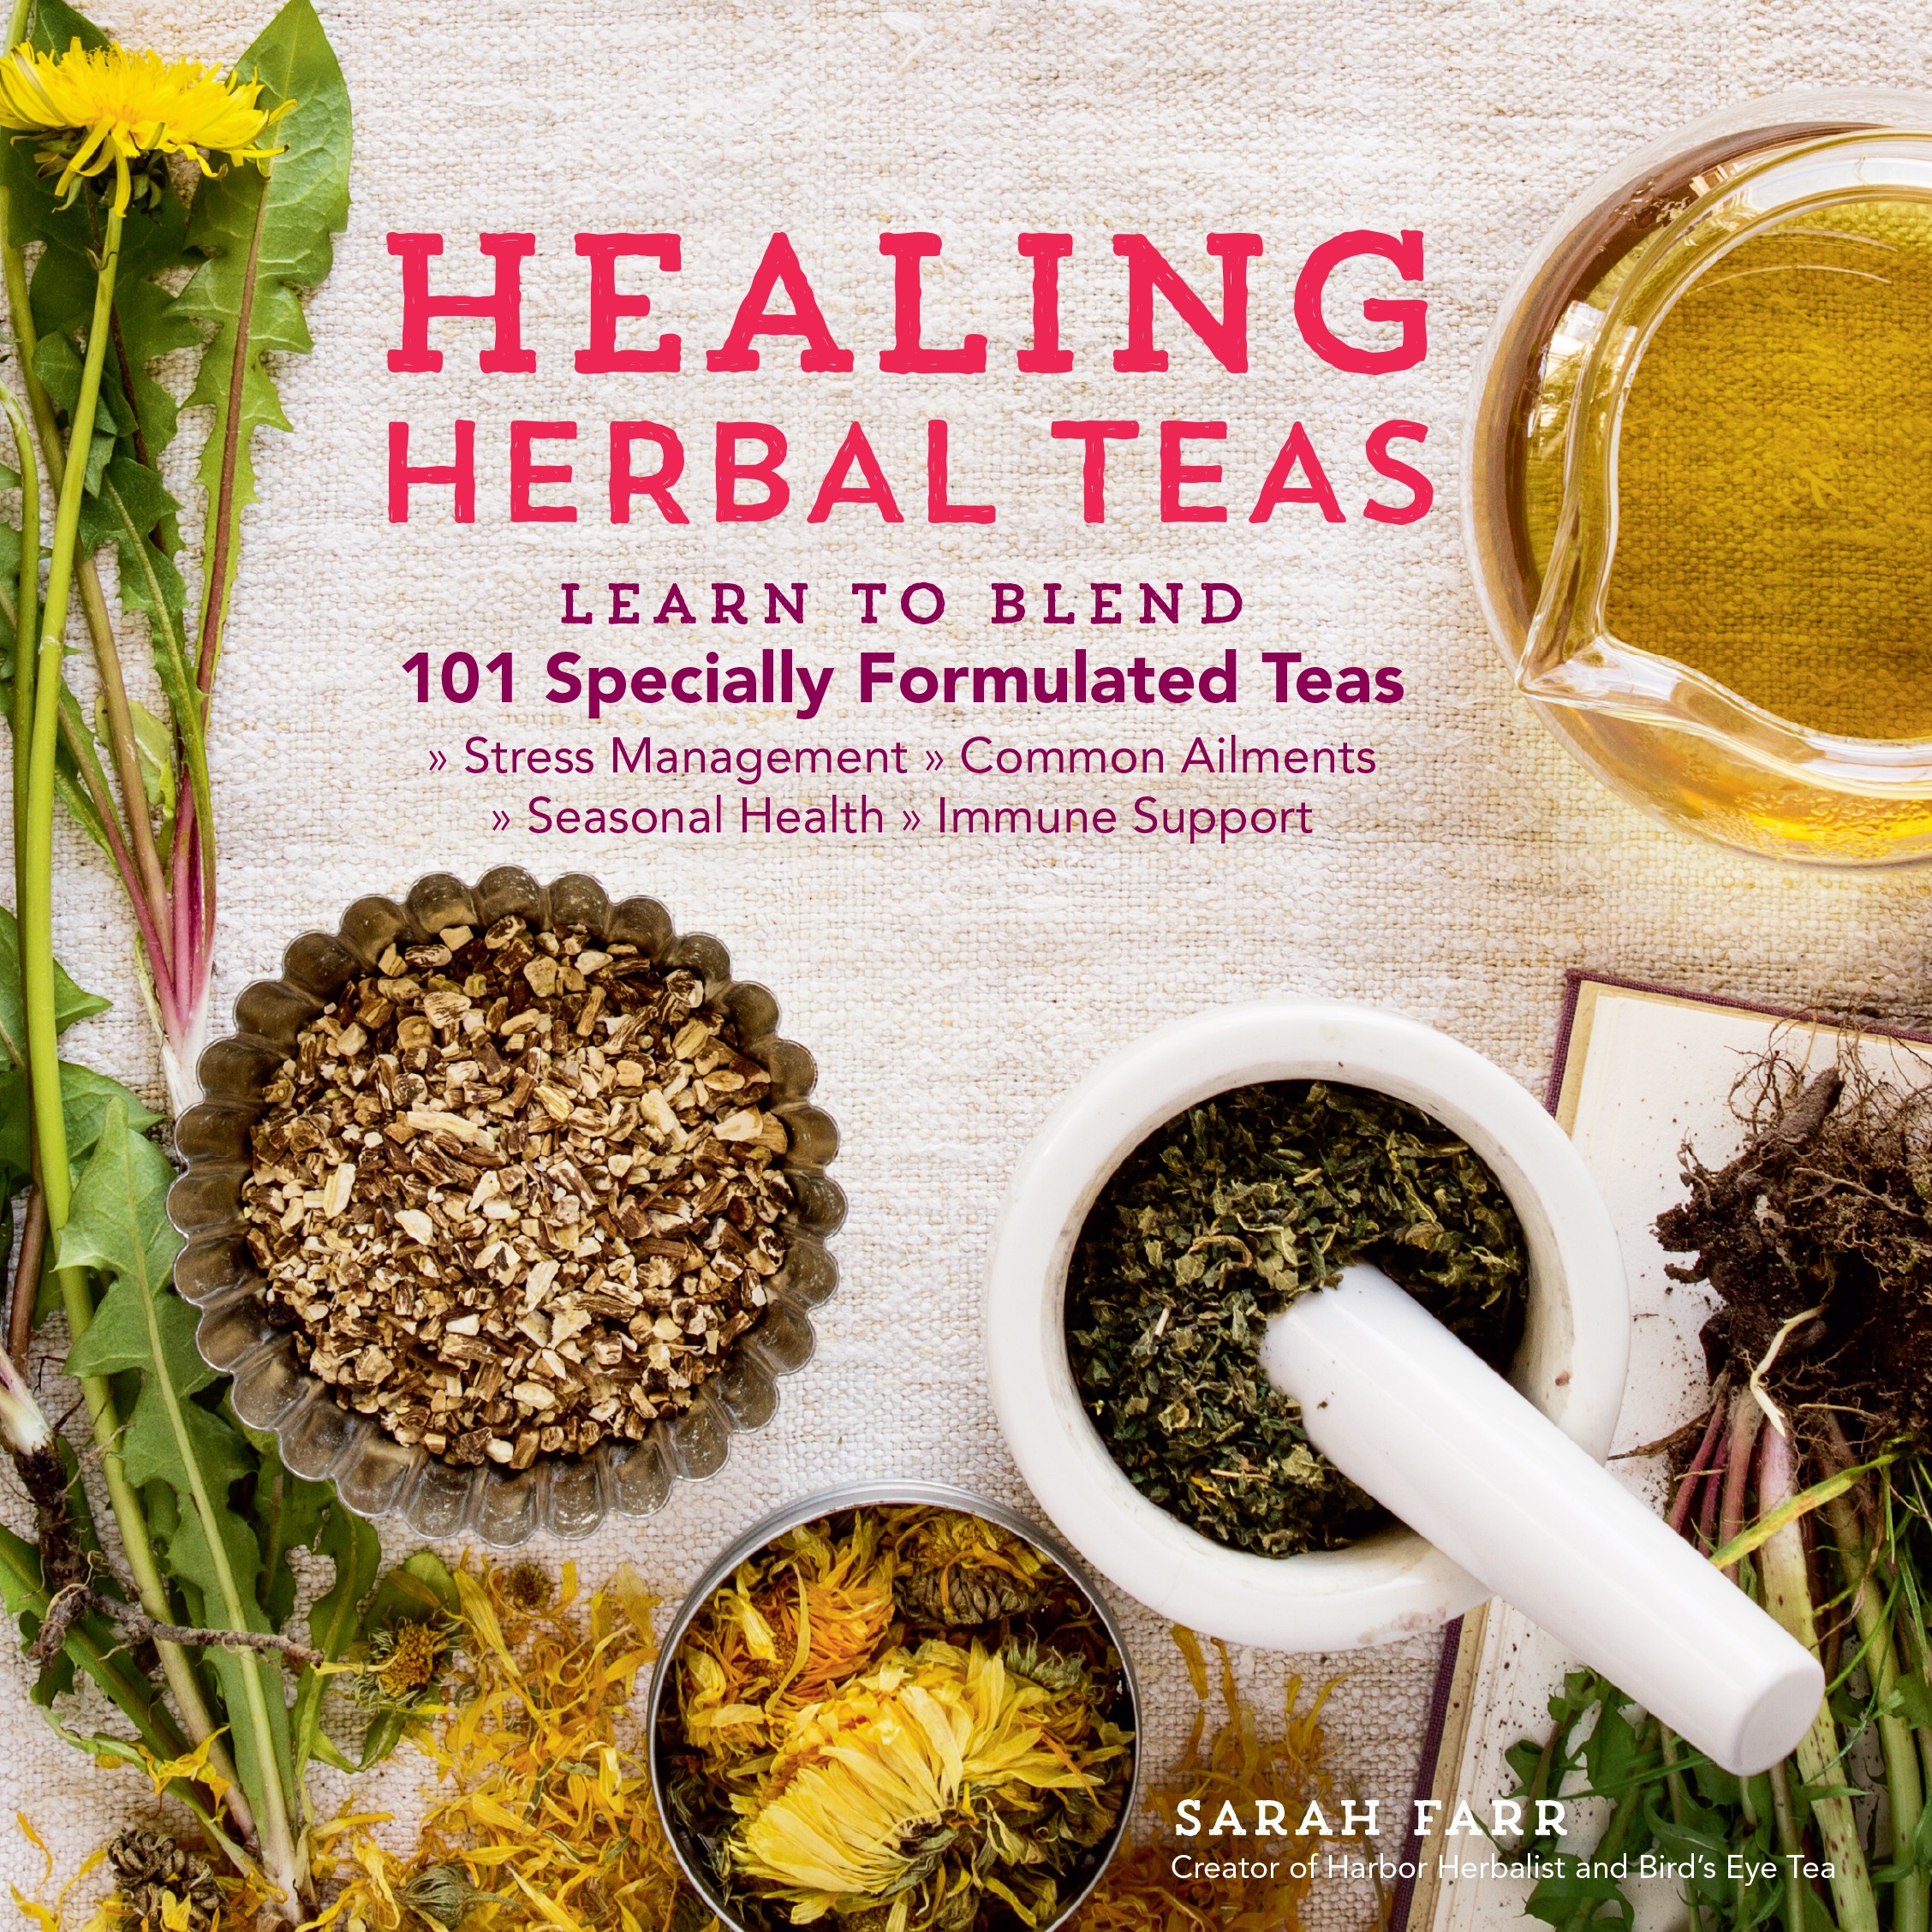 A comprehensive guide to the preparation of herbal teas and